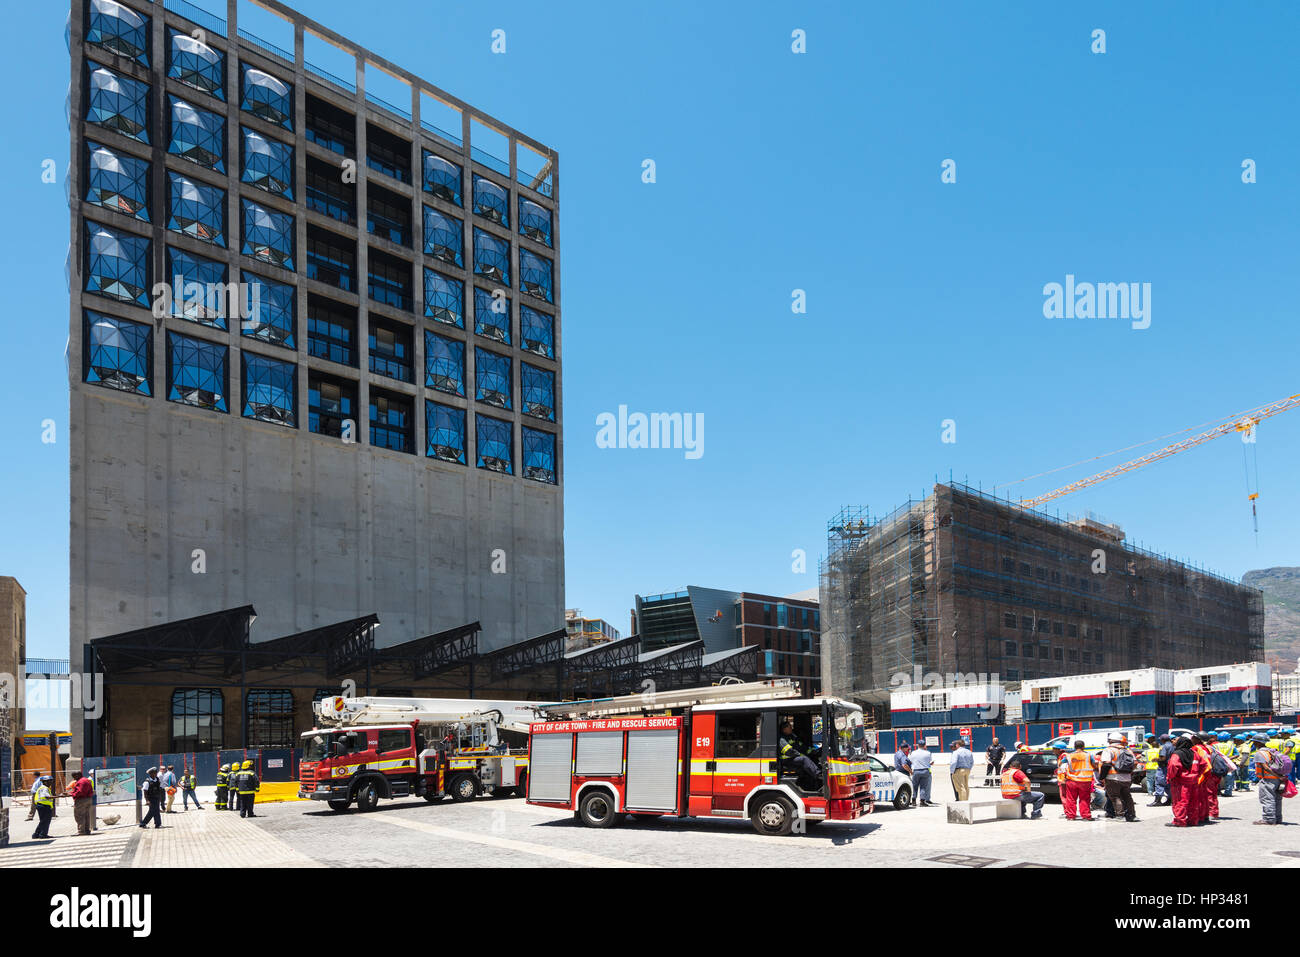 Cape Town, South Africa - December 1, 2016: Fire department in front of the construction site of the new Zeitz Museum of Contemporary Art of Africa in Stock Photo